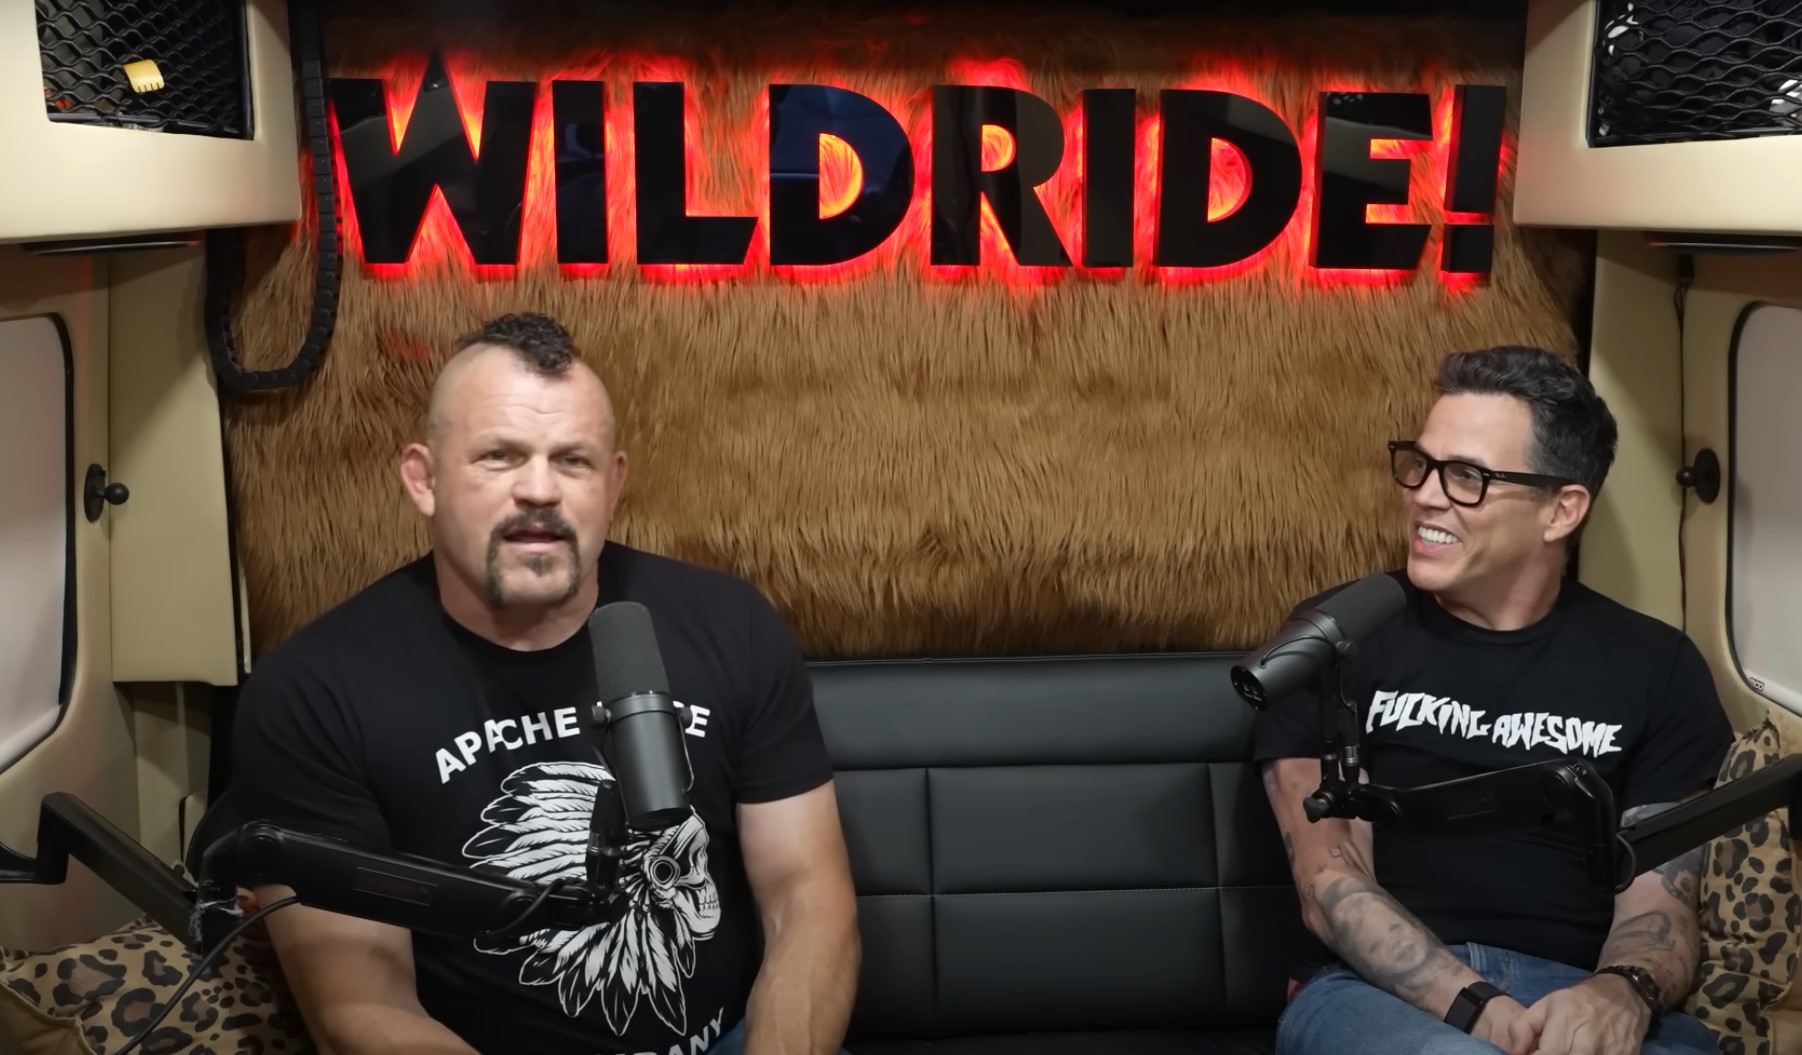 Chuck Liddell tells Steve-O wild story about his bar fight against a bunch of Navy Seals